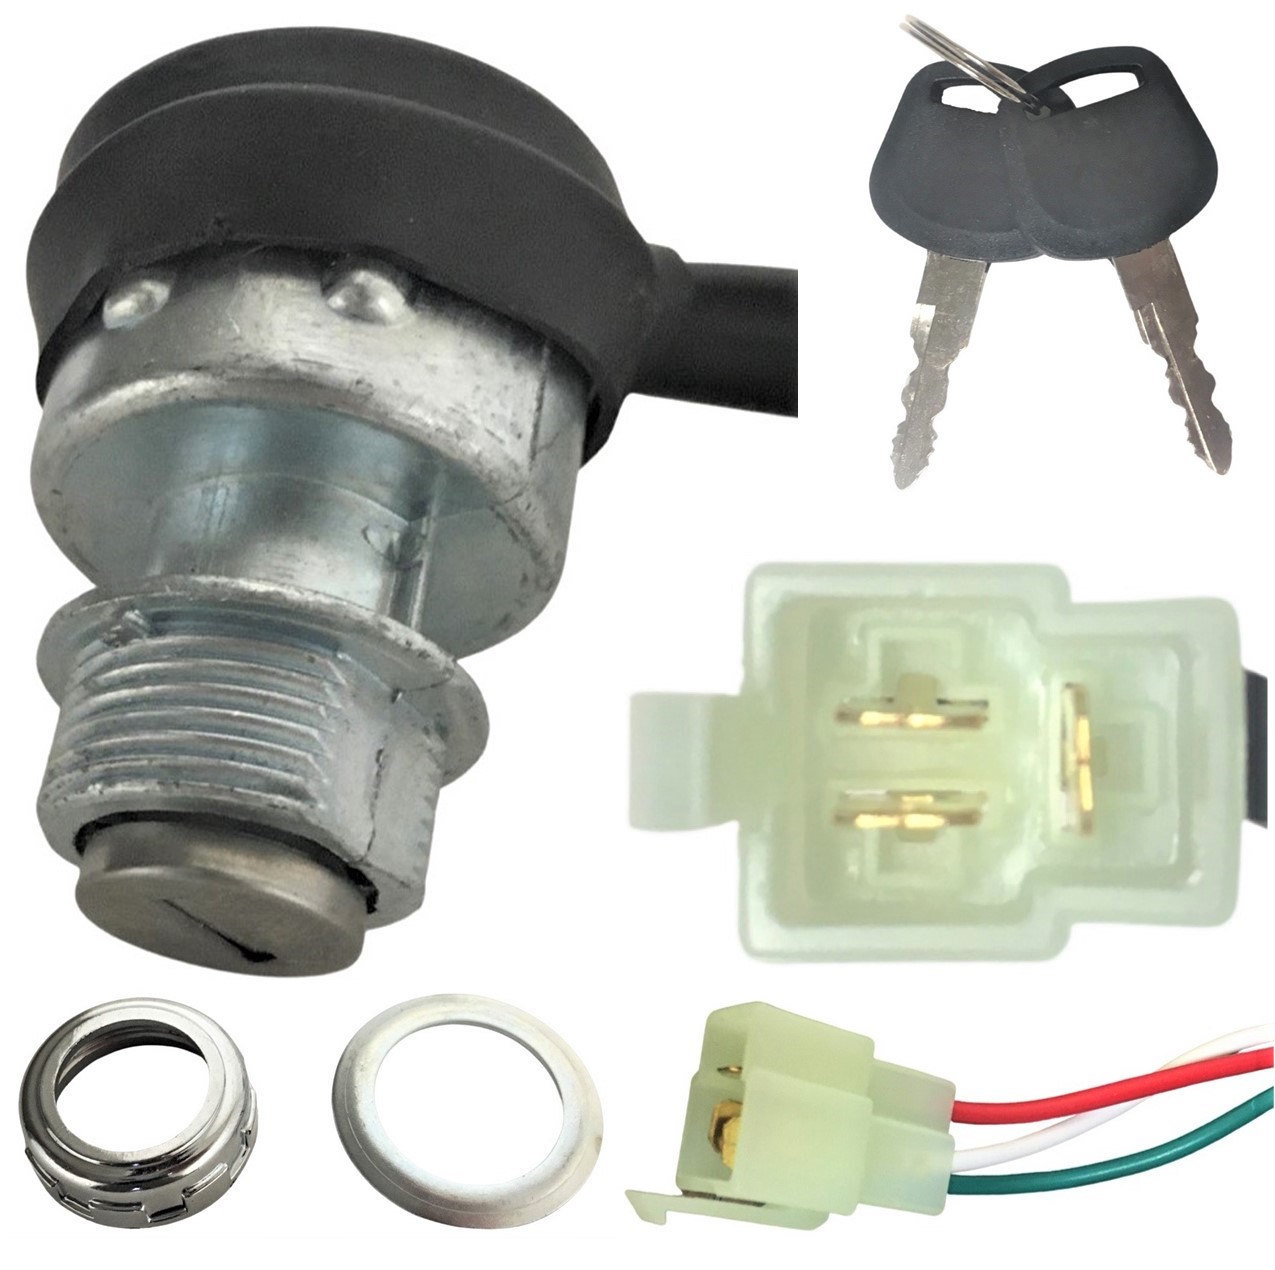 Ignition Switch Fits Many ATV-GoKarts-Dirtbikes 3 Pins in 3 Pin Female Jack